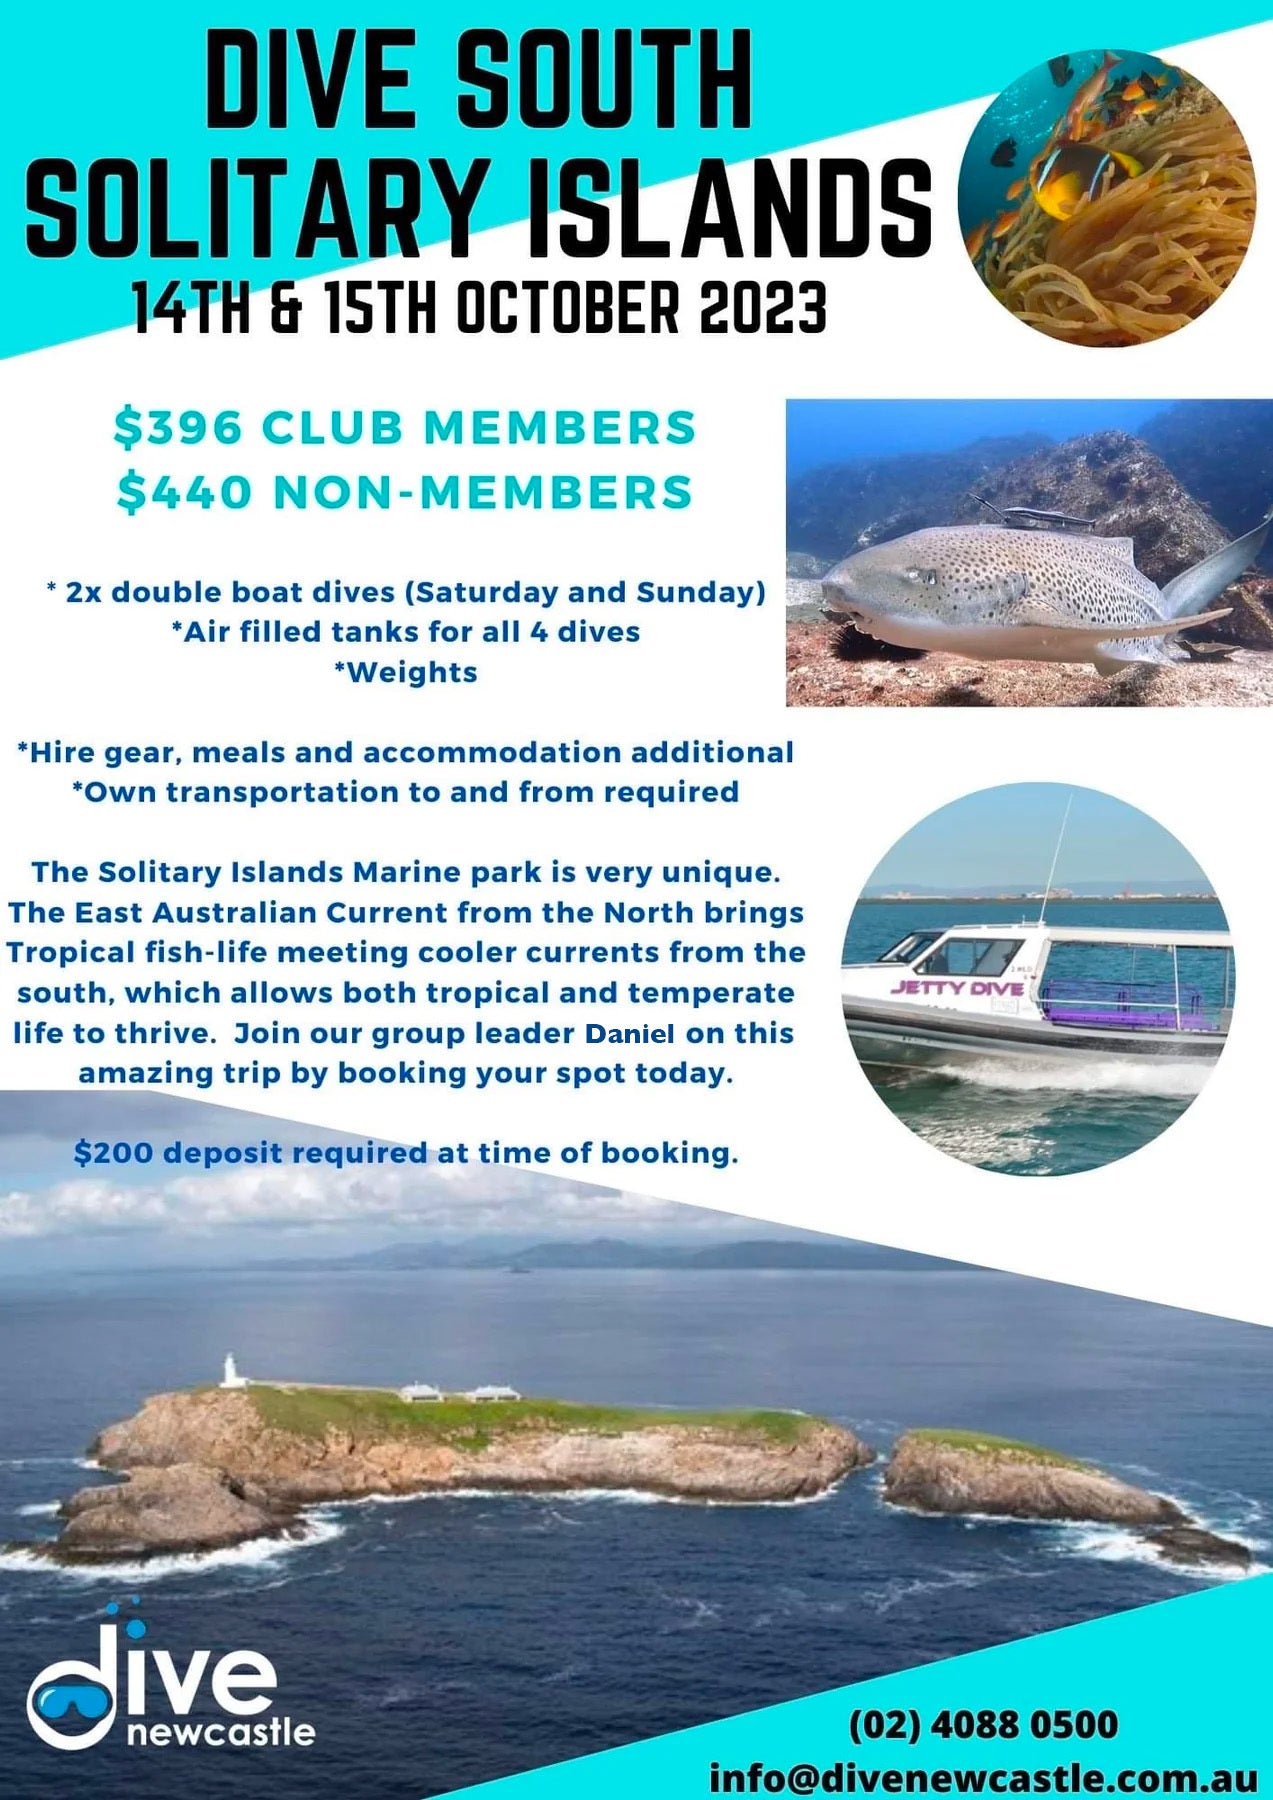 South Solitary Islands Dive Trip OCT 14-15 SOLD OUT